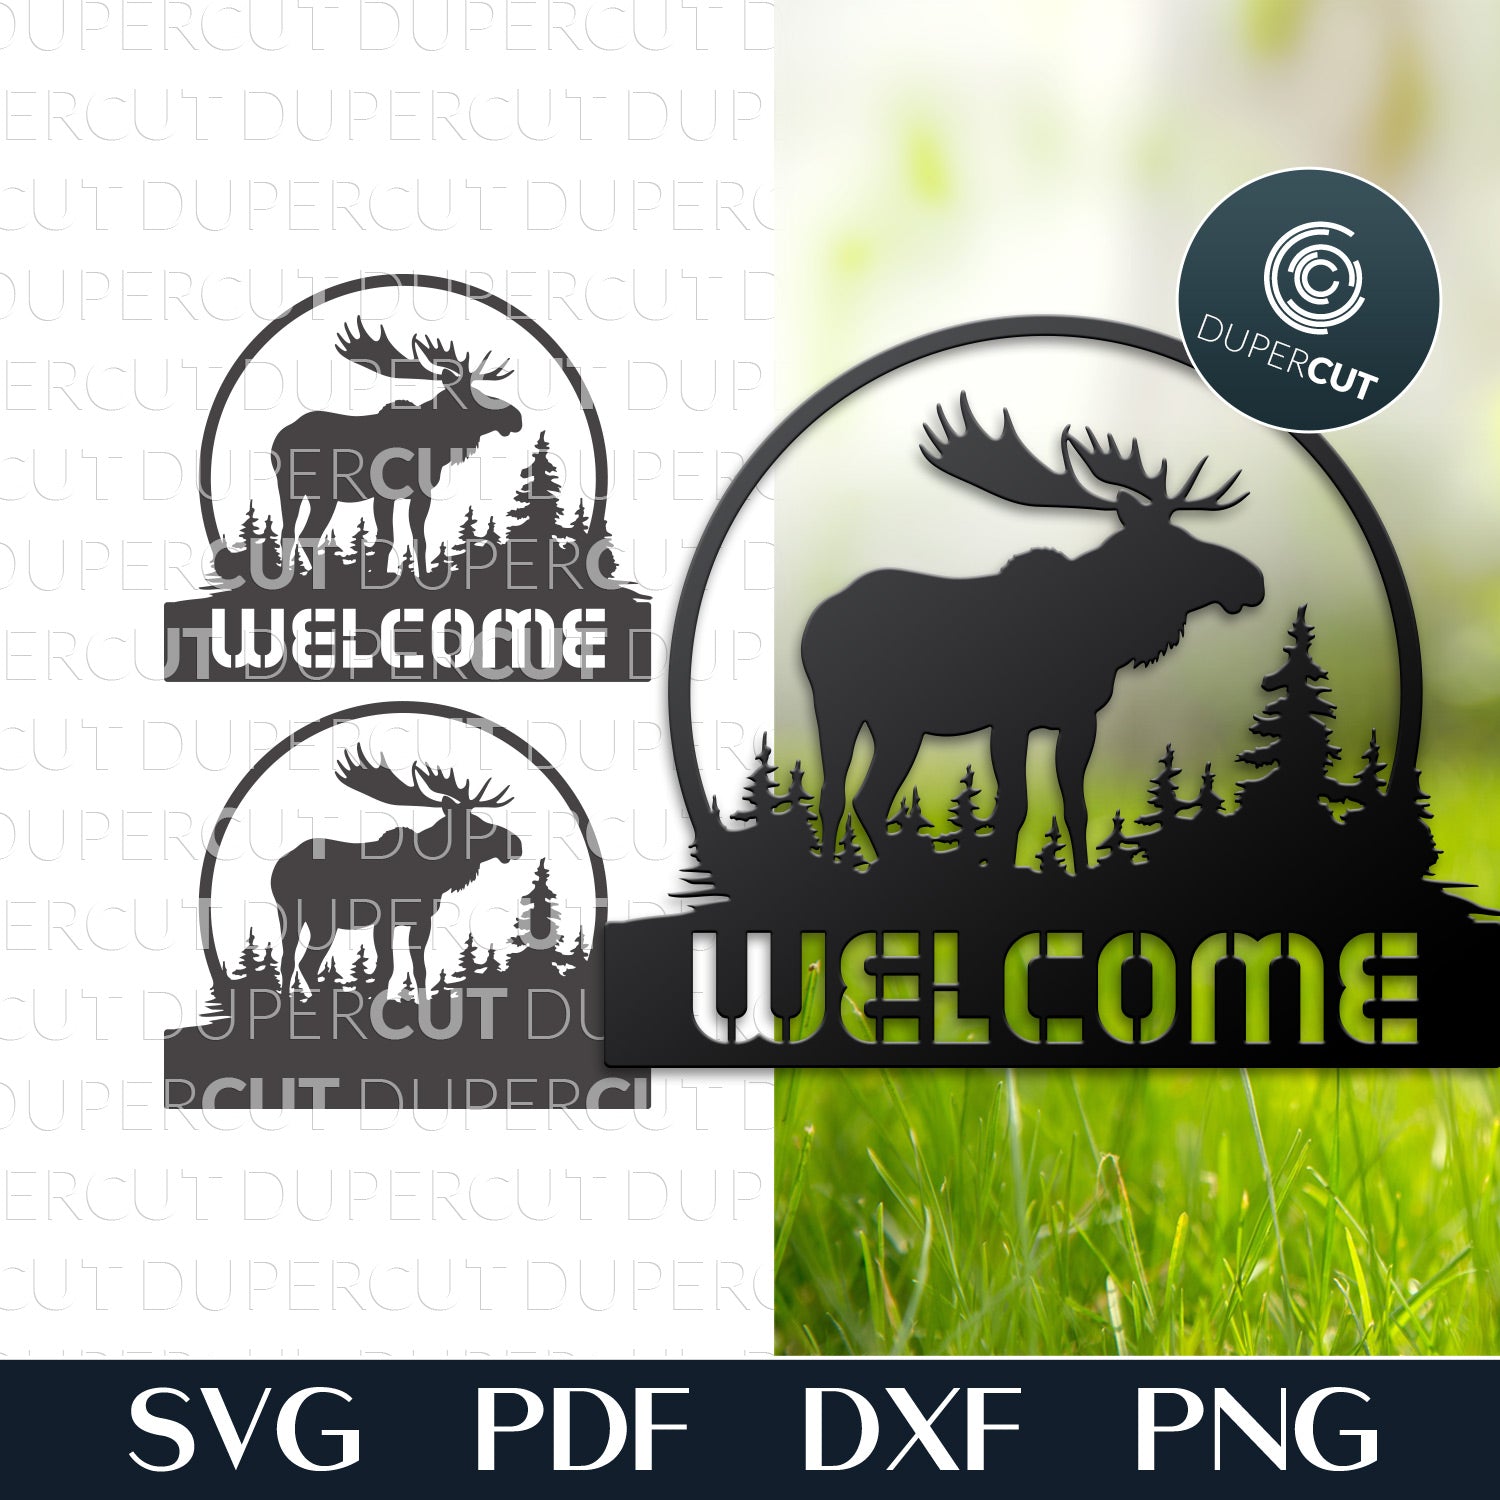 Moose in the woods wilderness welcome sign - SVG DXF vector template for Glowforge, Cricut, X-tool, cnc plasma machines, scroll saw pattern by www.DuperCut.com